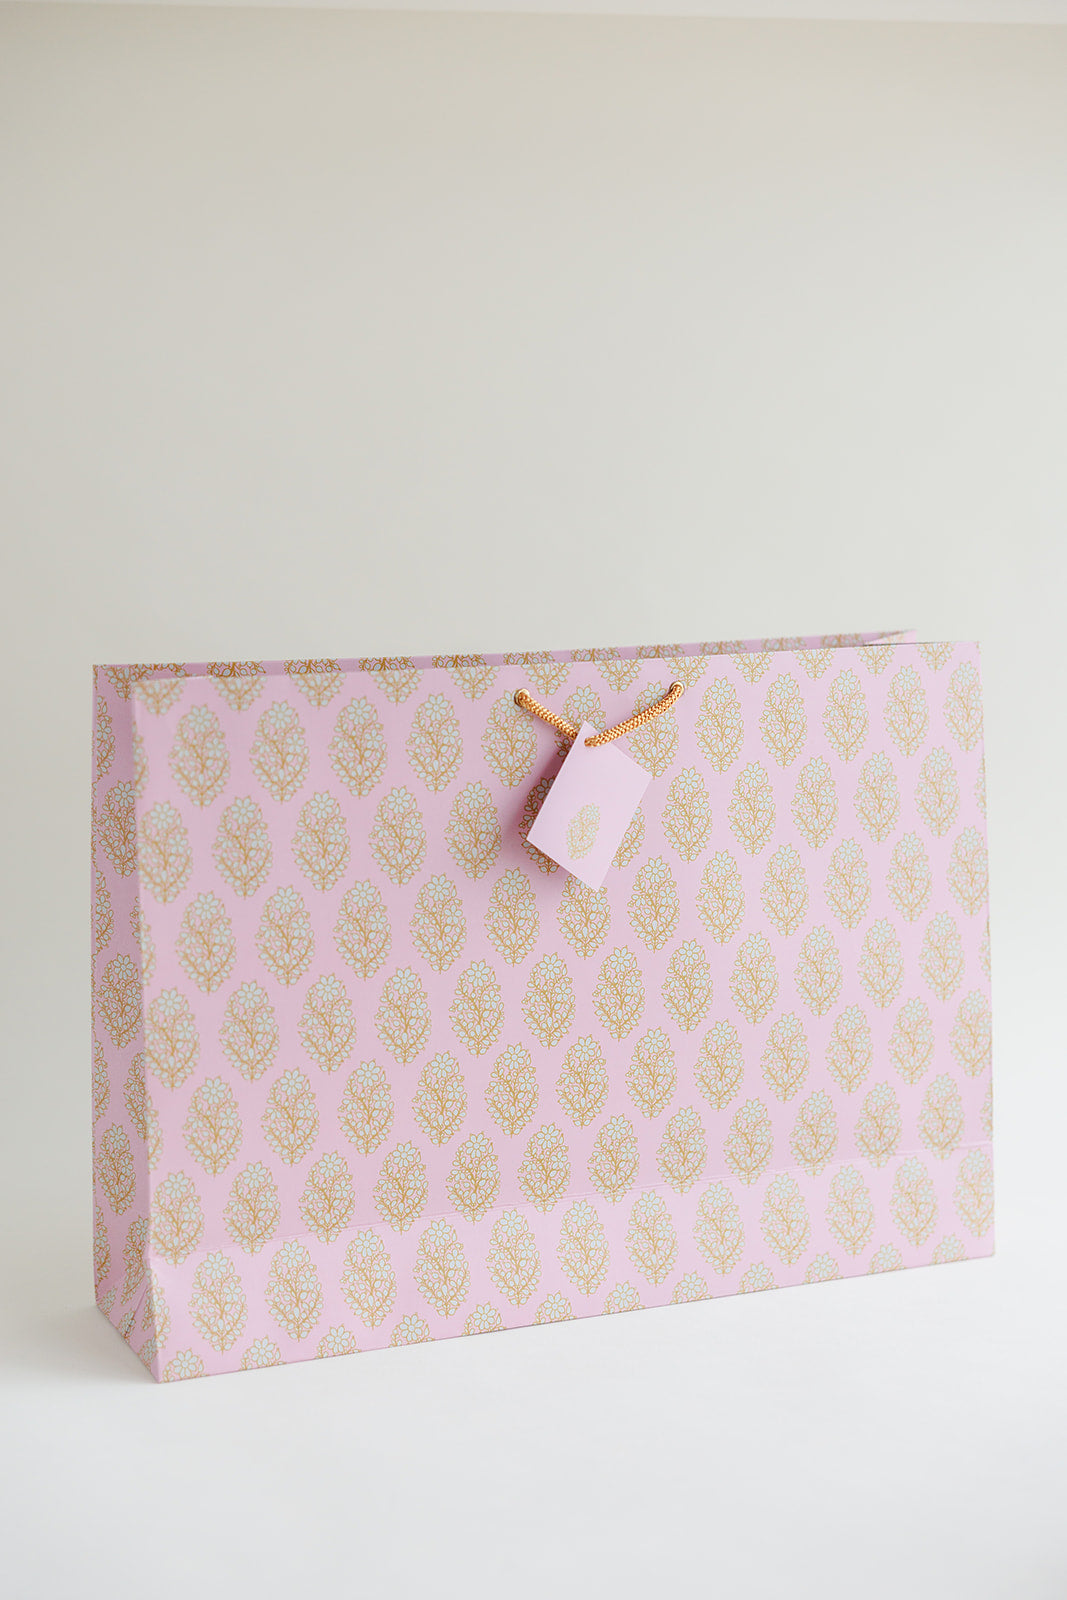 5 Leilani Lilac Gift Bags with Matching Gift Envelope